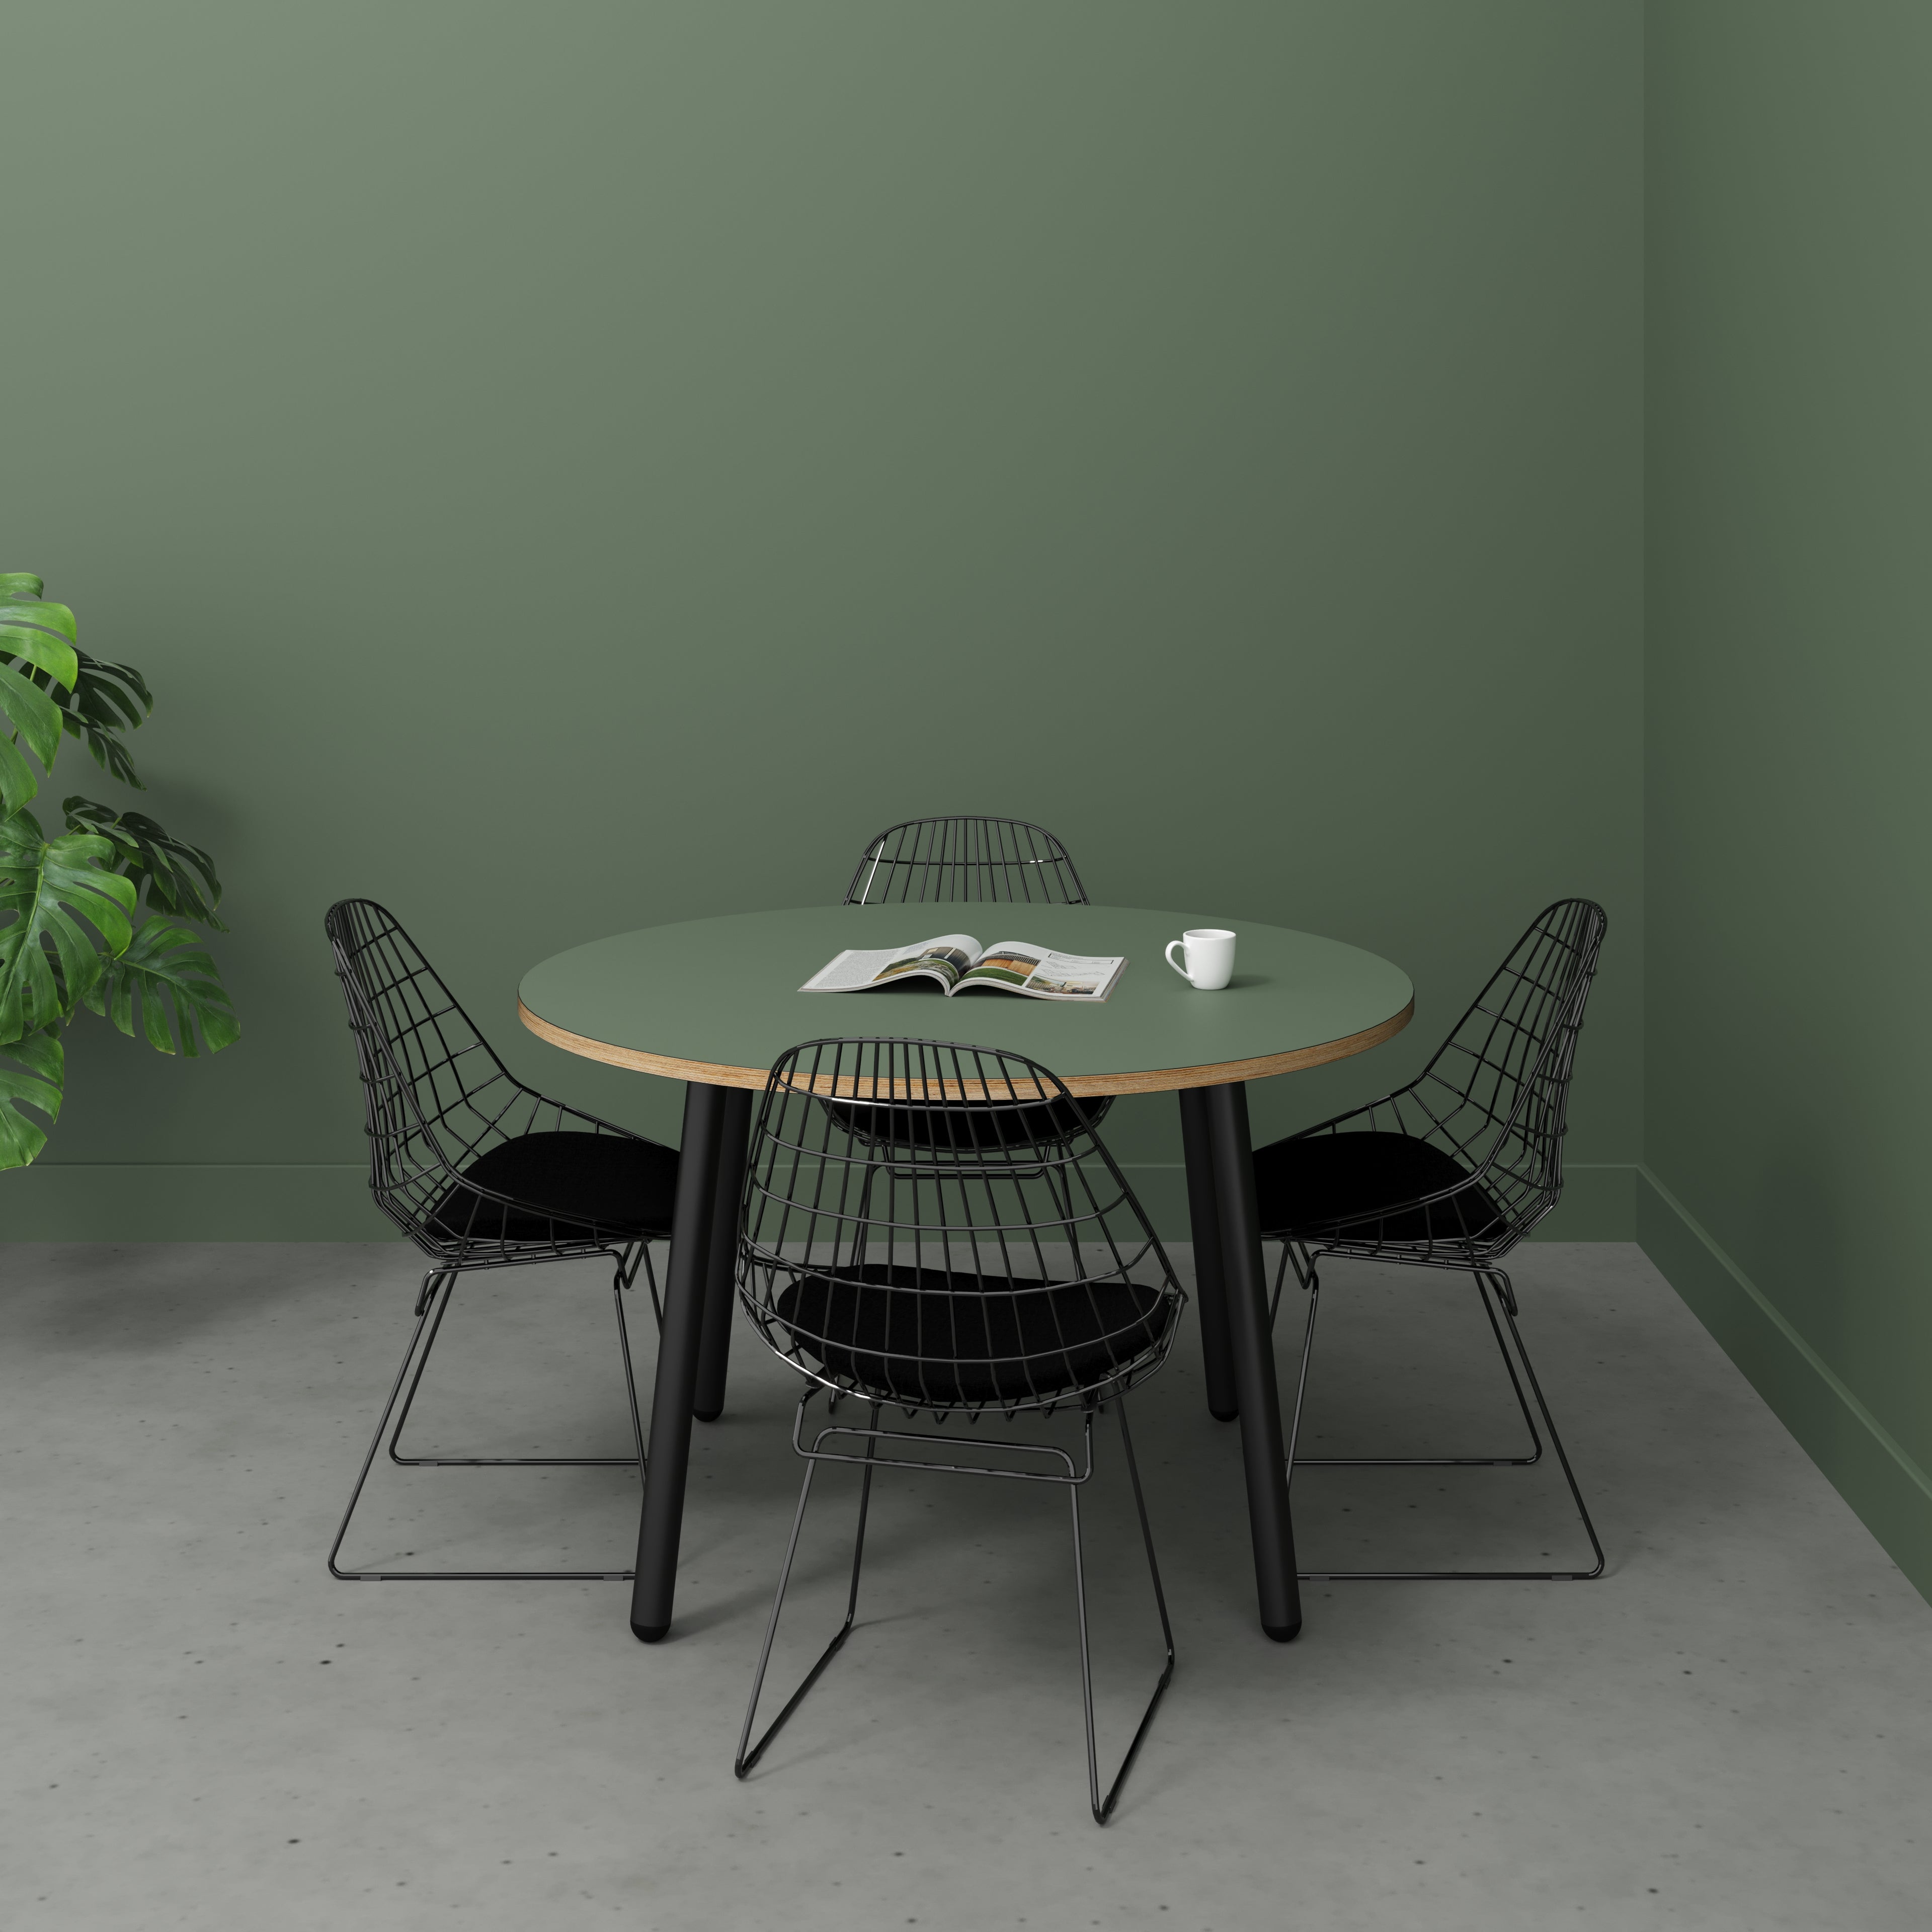 Round Table with Black Round Single Pin Legs - Formica Green Slate - 1200(dia) x 750(h)